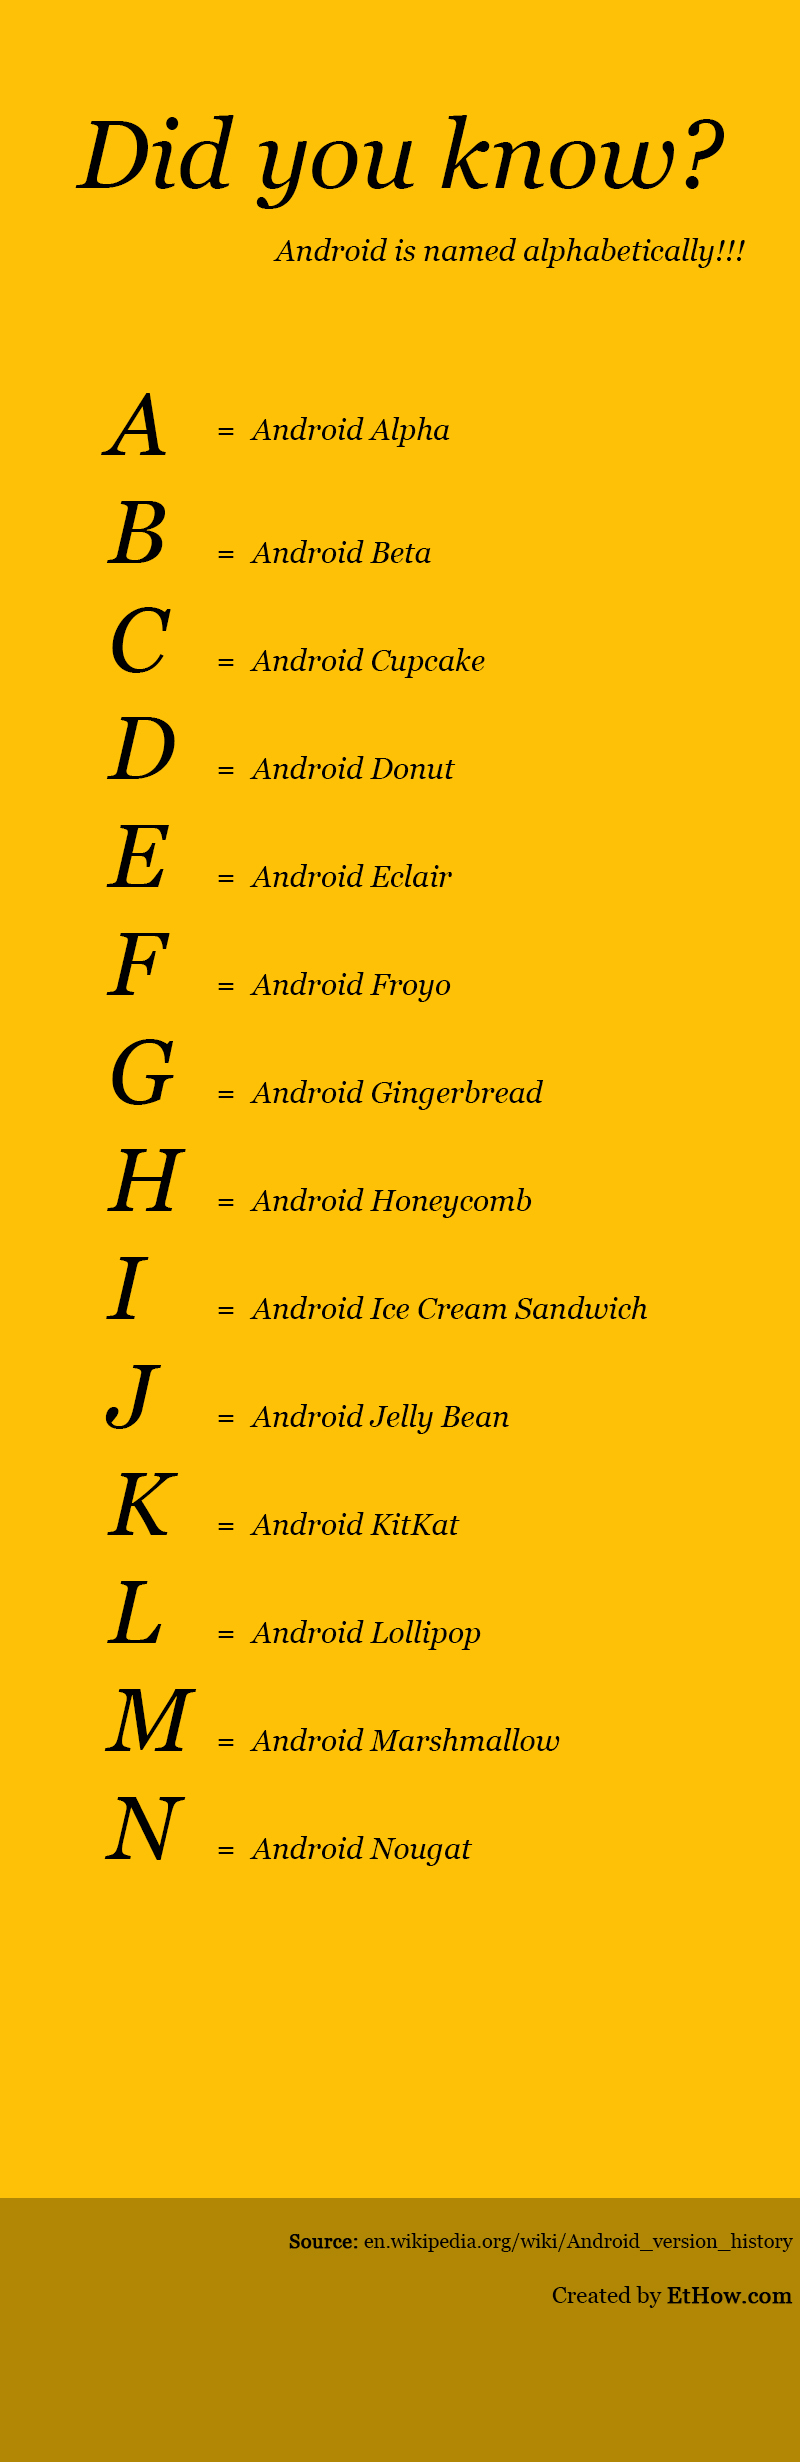 Android names are based on dessets and are alphabetical.